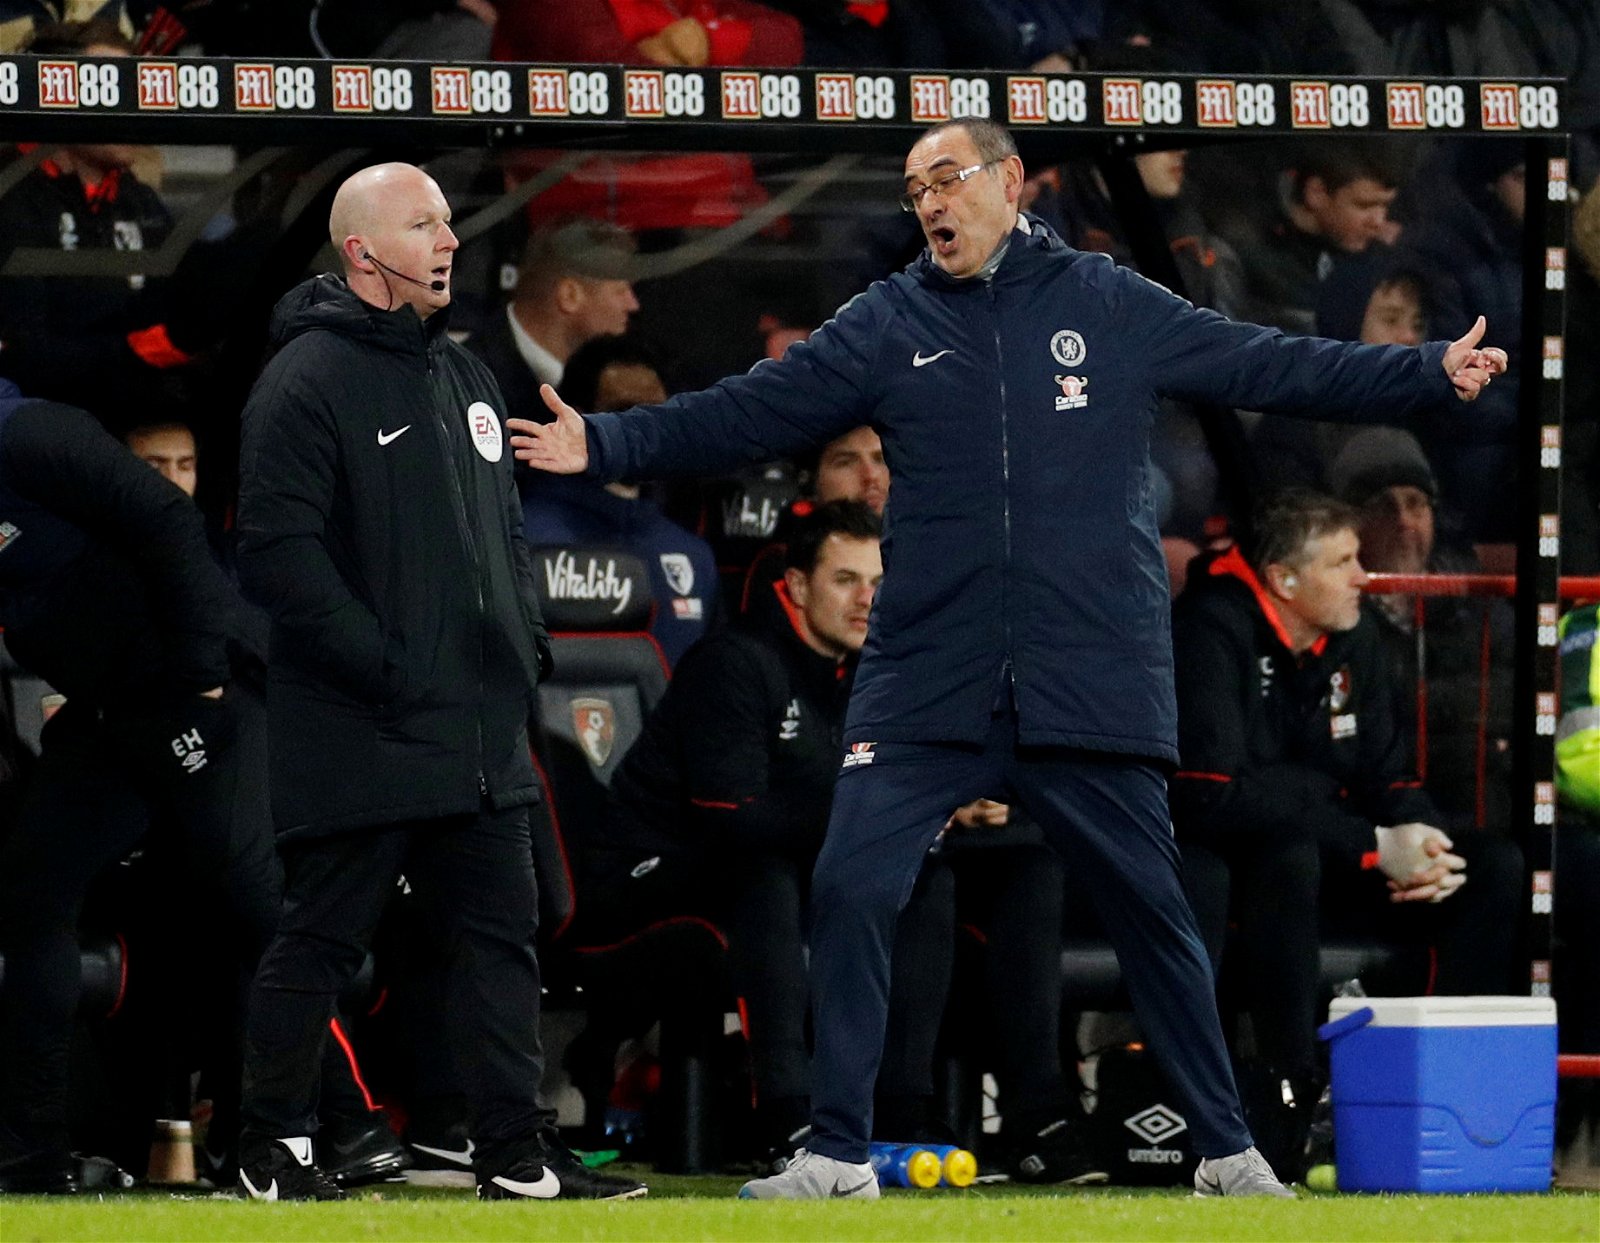 "He could be sacked after this game," expert makes prediction regarding Sarri's future